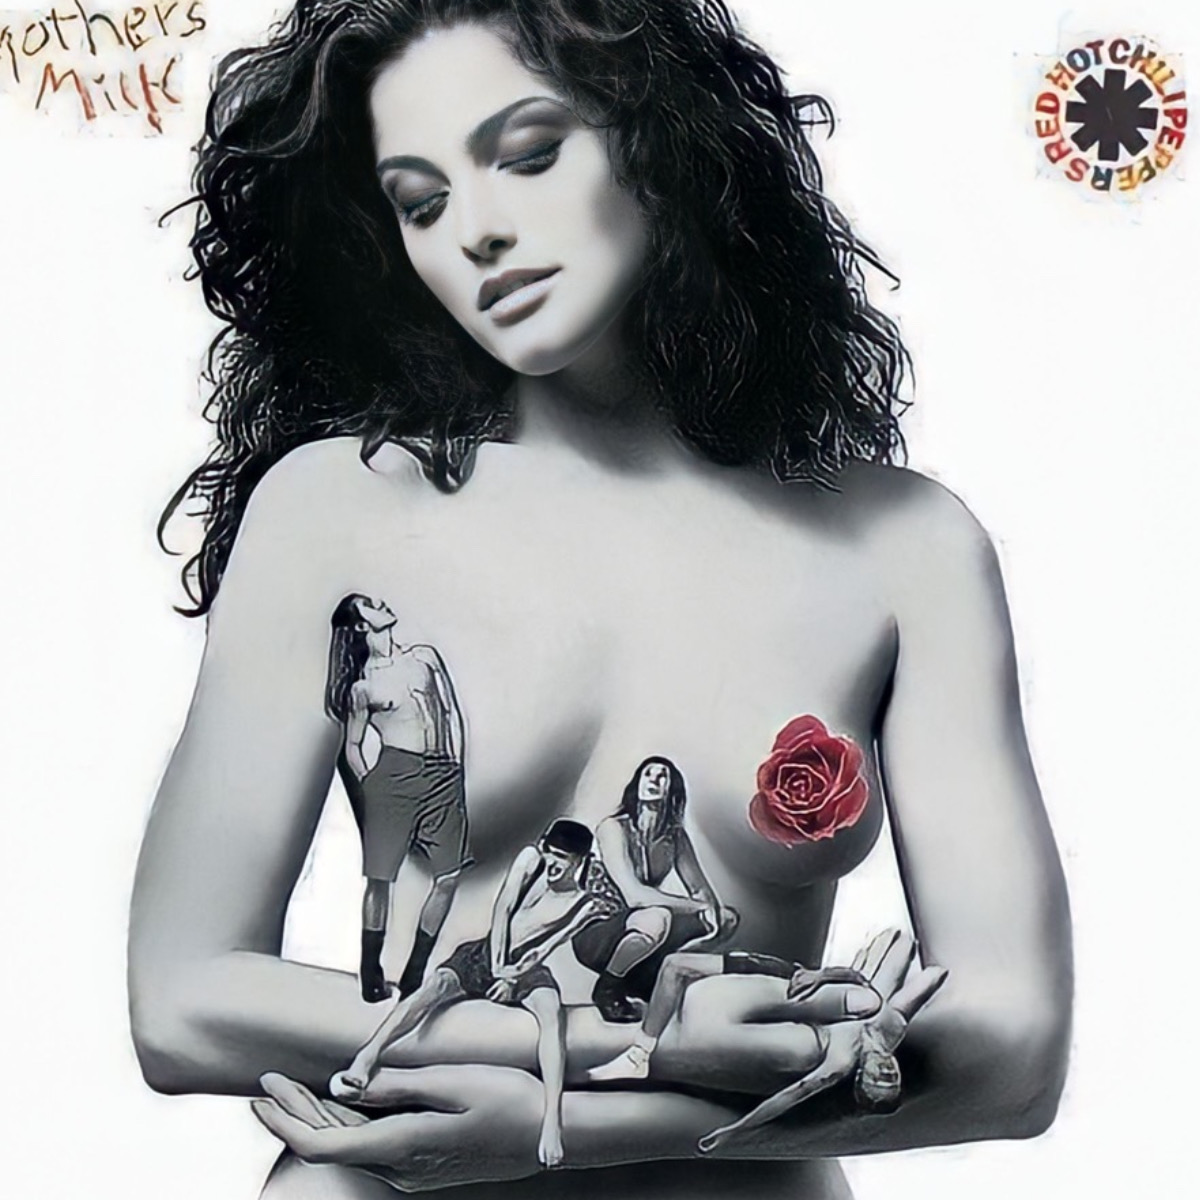 The cover of the album "Mother's Milk" by the Red Hot Chili Peppers.